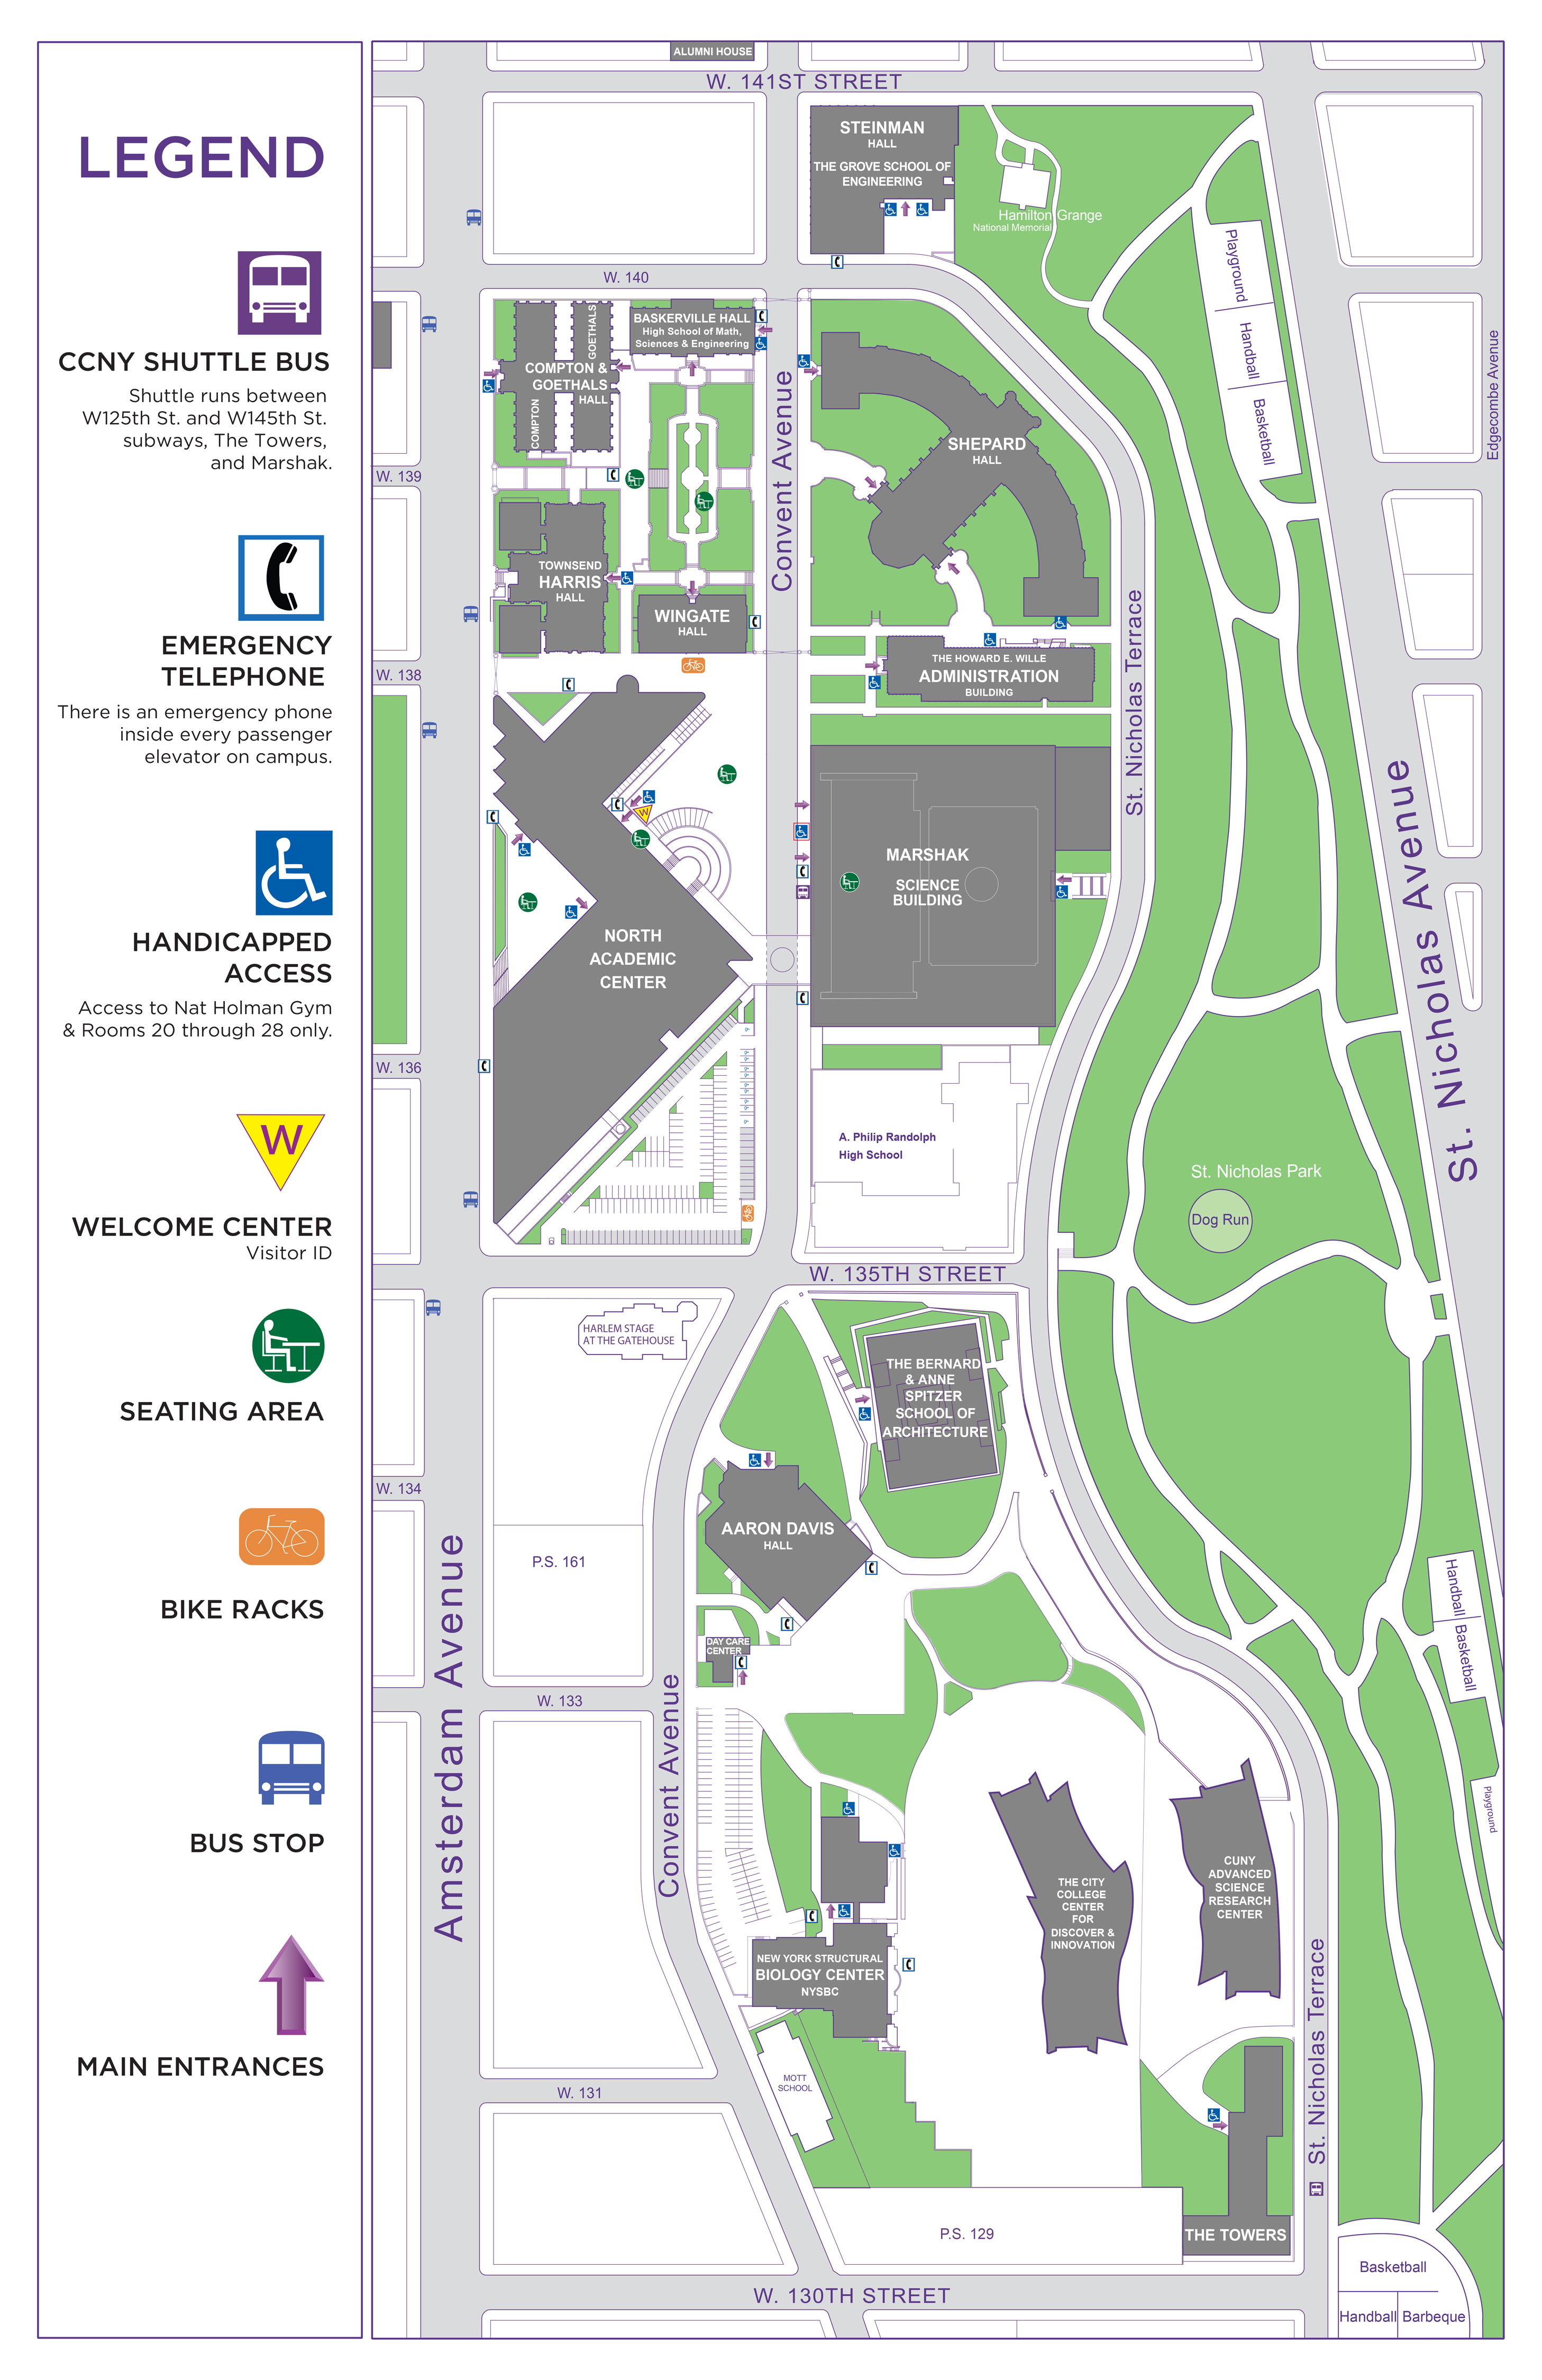 city college of new york campus map Ccny Campus Map The City College Of New York city college of new york campus map